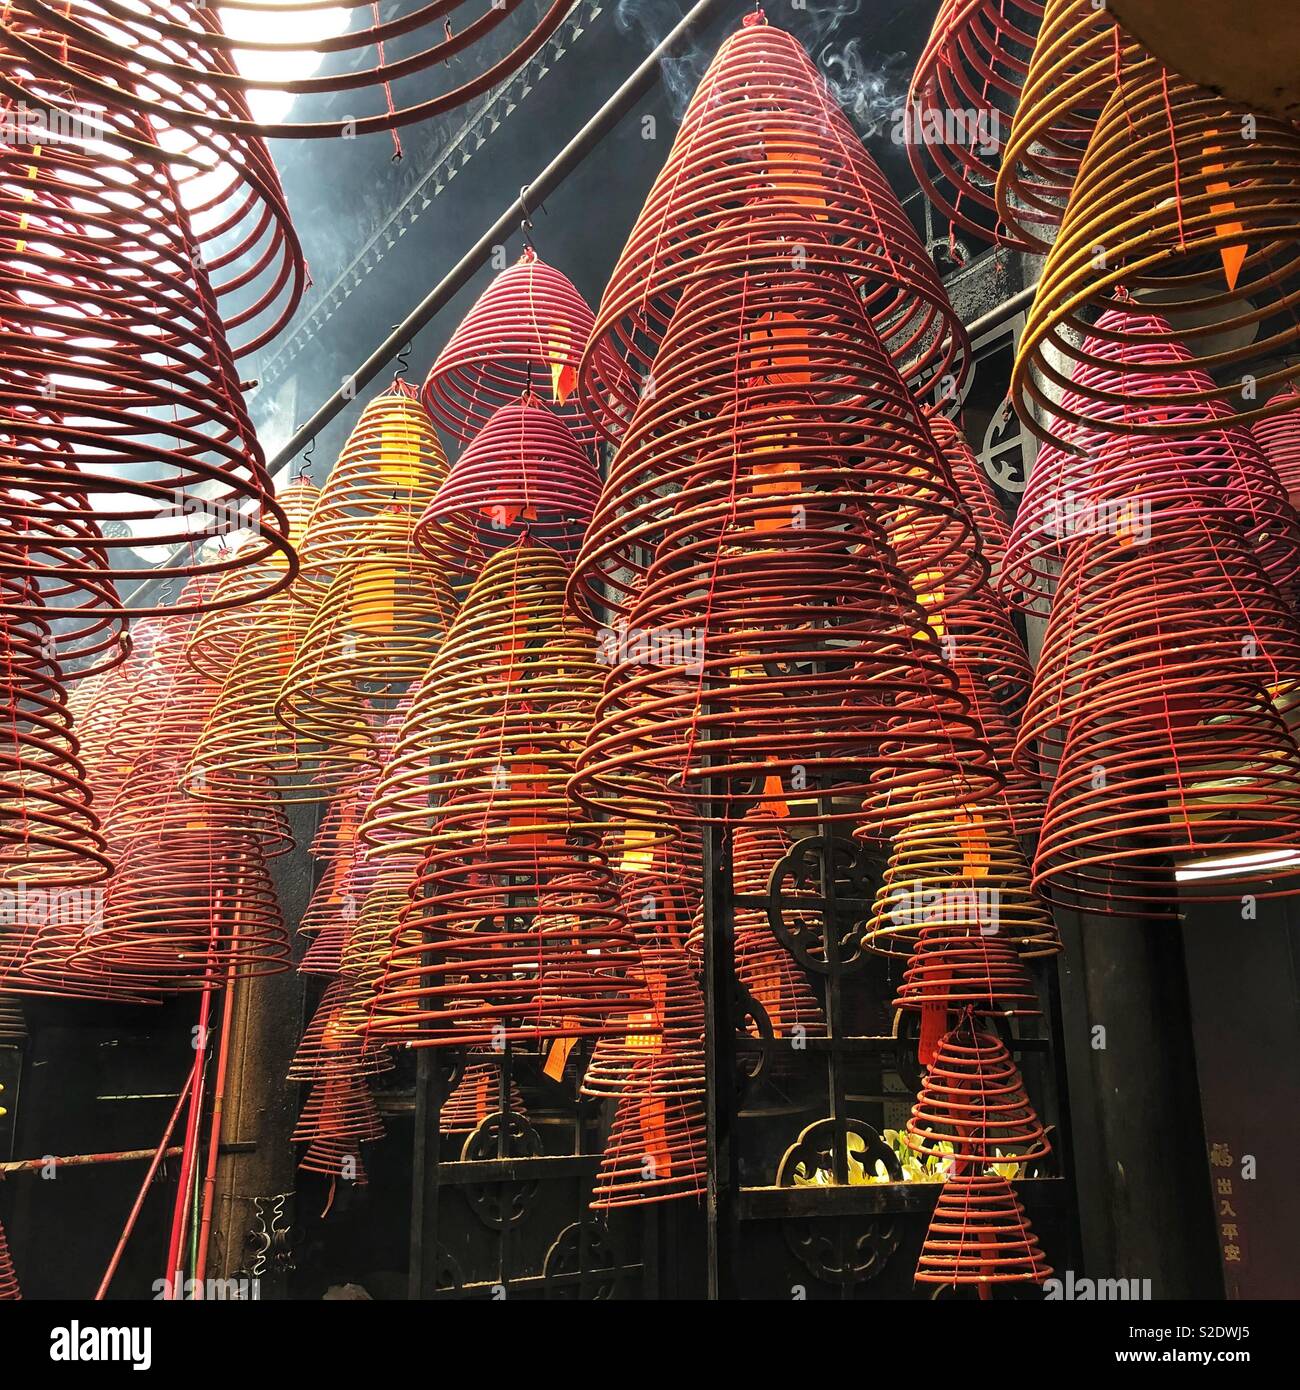 Incenses in a Buddhist temple Stock Photo